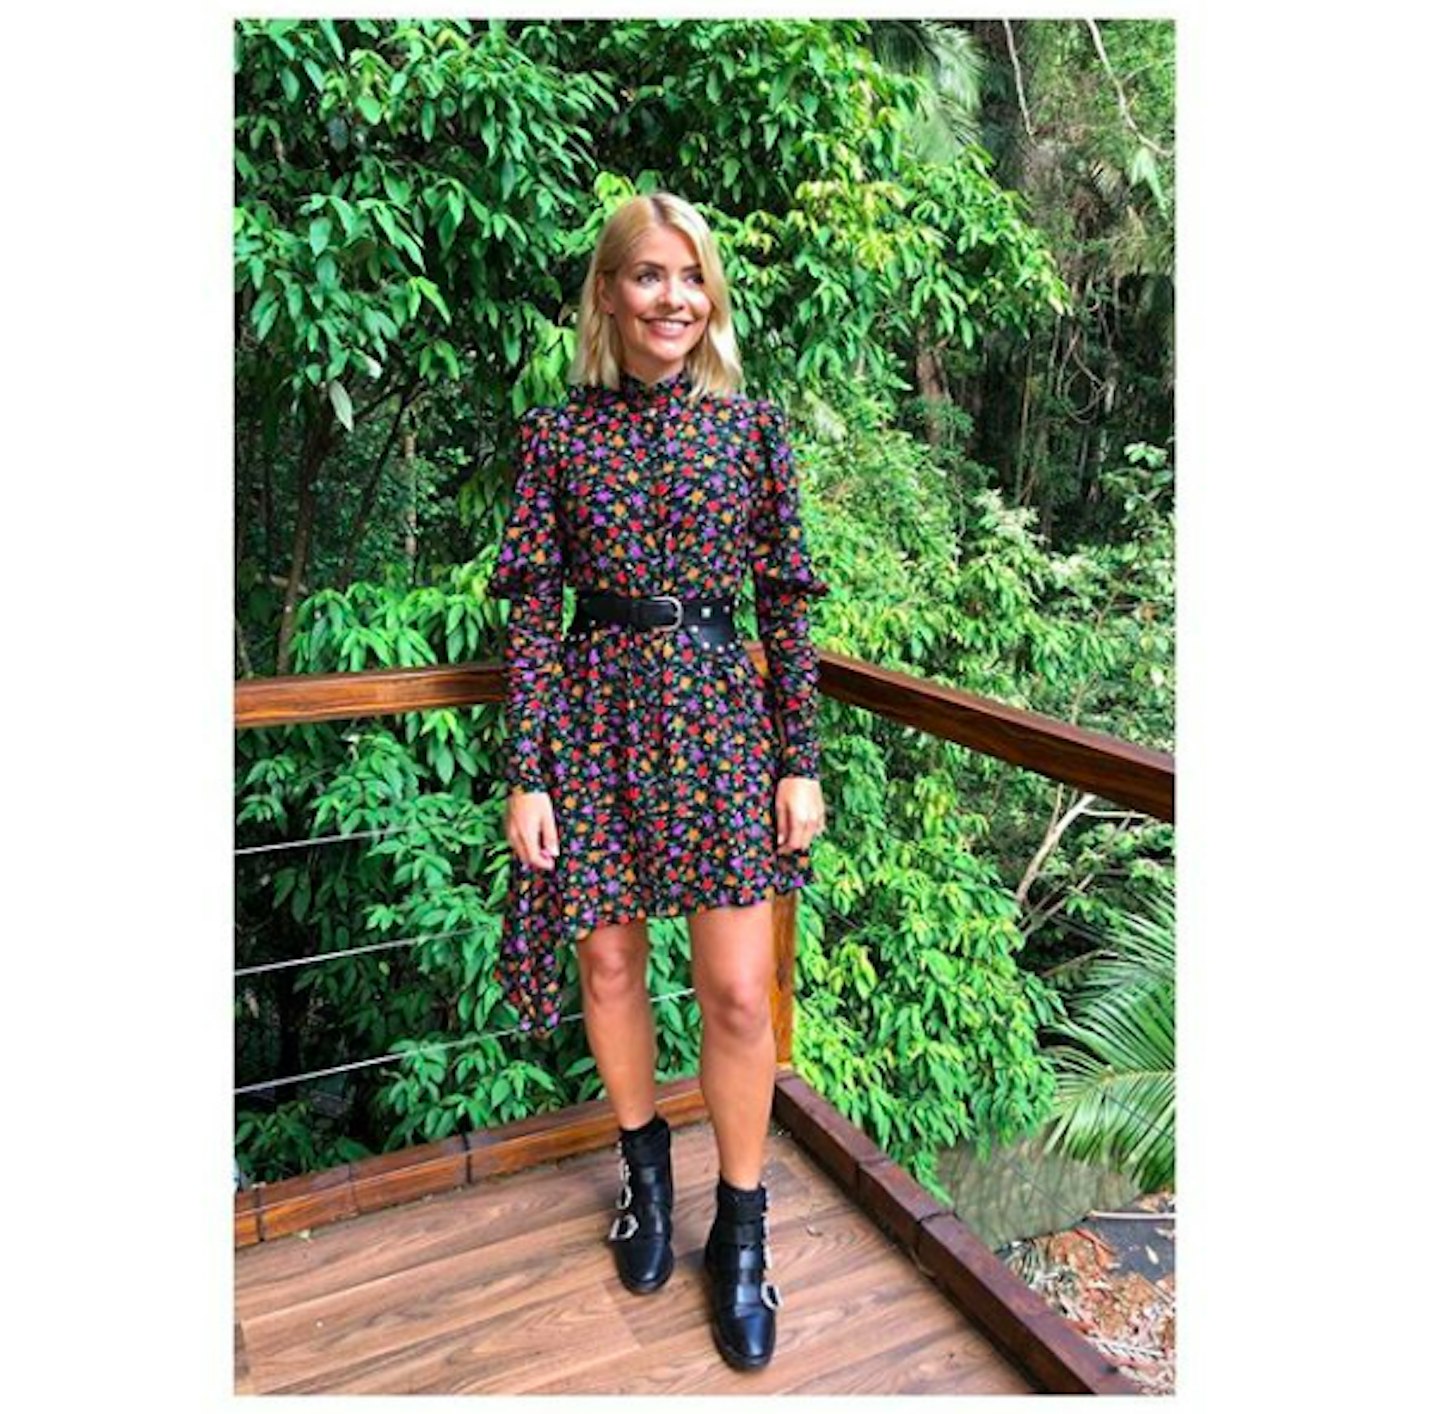 holly willoughby im a celeb outfit 3 december 2018